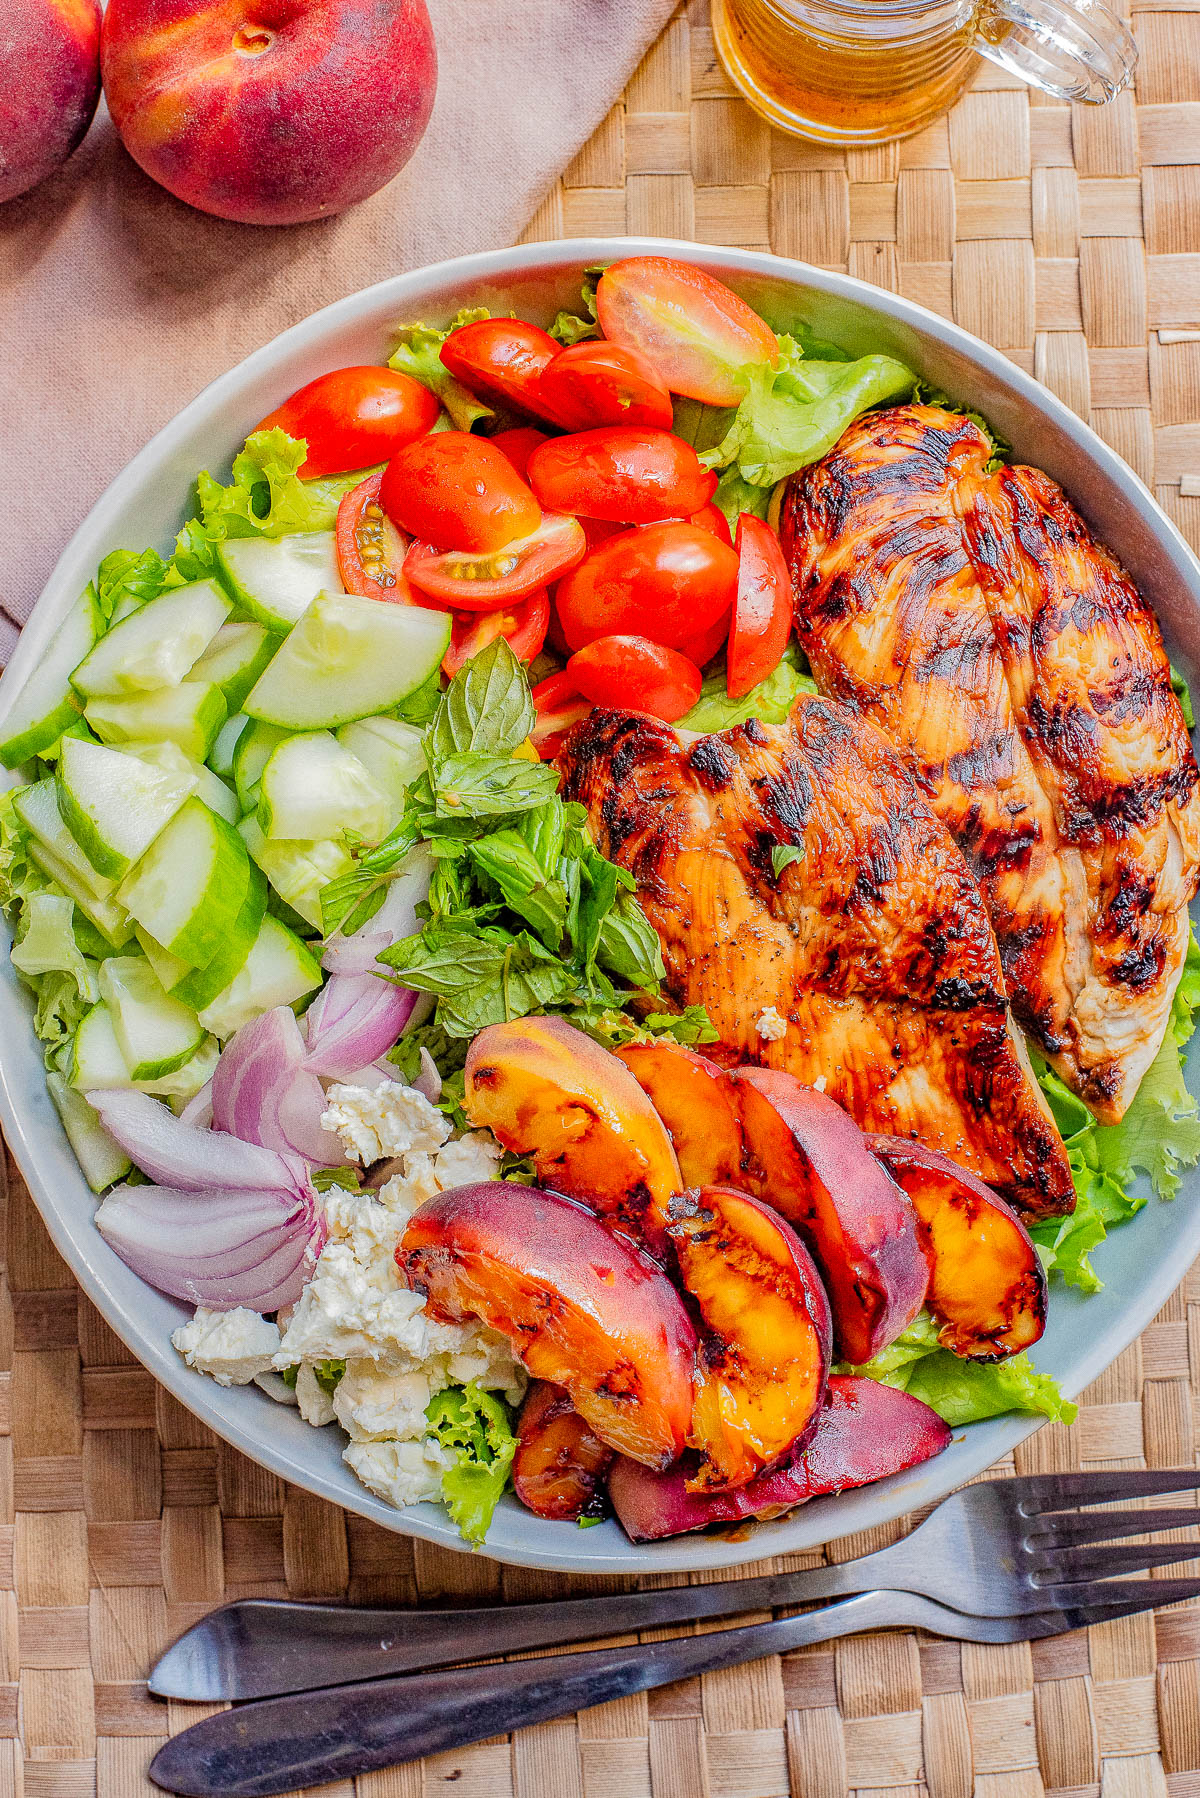 A salad bowl with grilled chicken, sliced peaches, cucumbers, cherry tomatoes, leafy greens, red onions, and feta cheese, placed on a woven mat with whole peaches and utensils beside it.